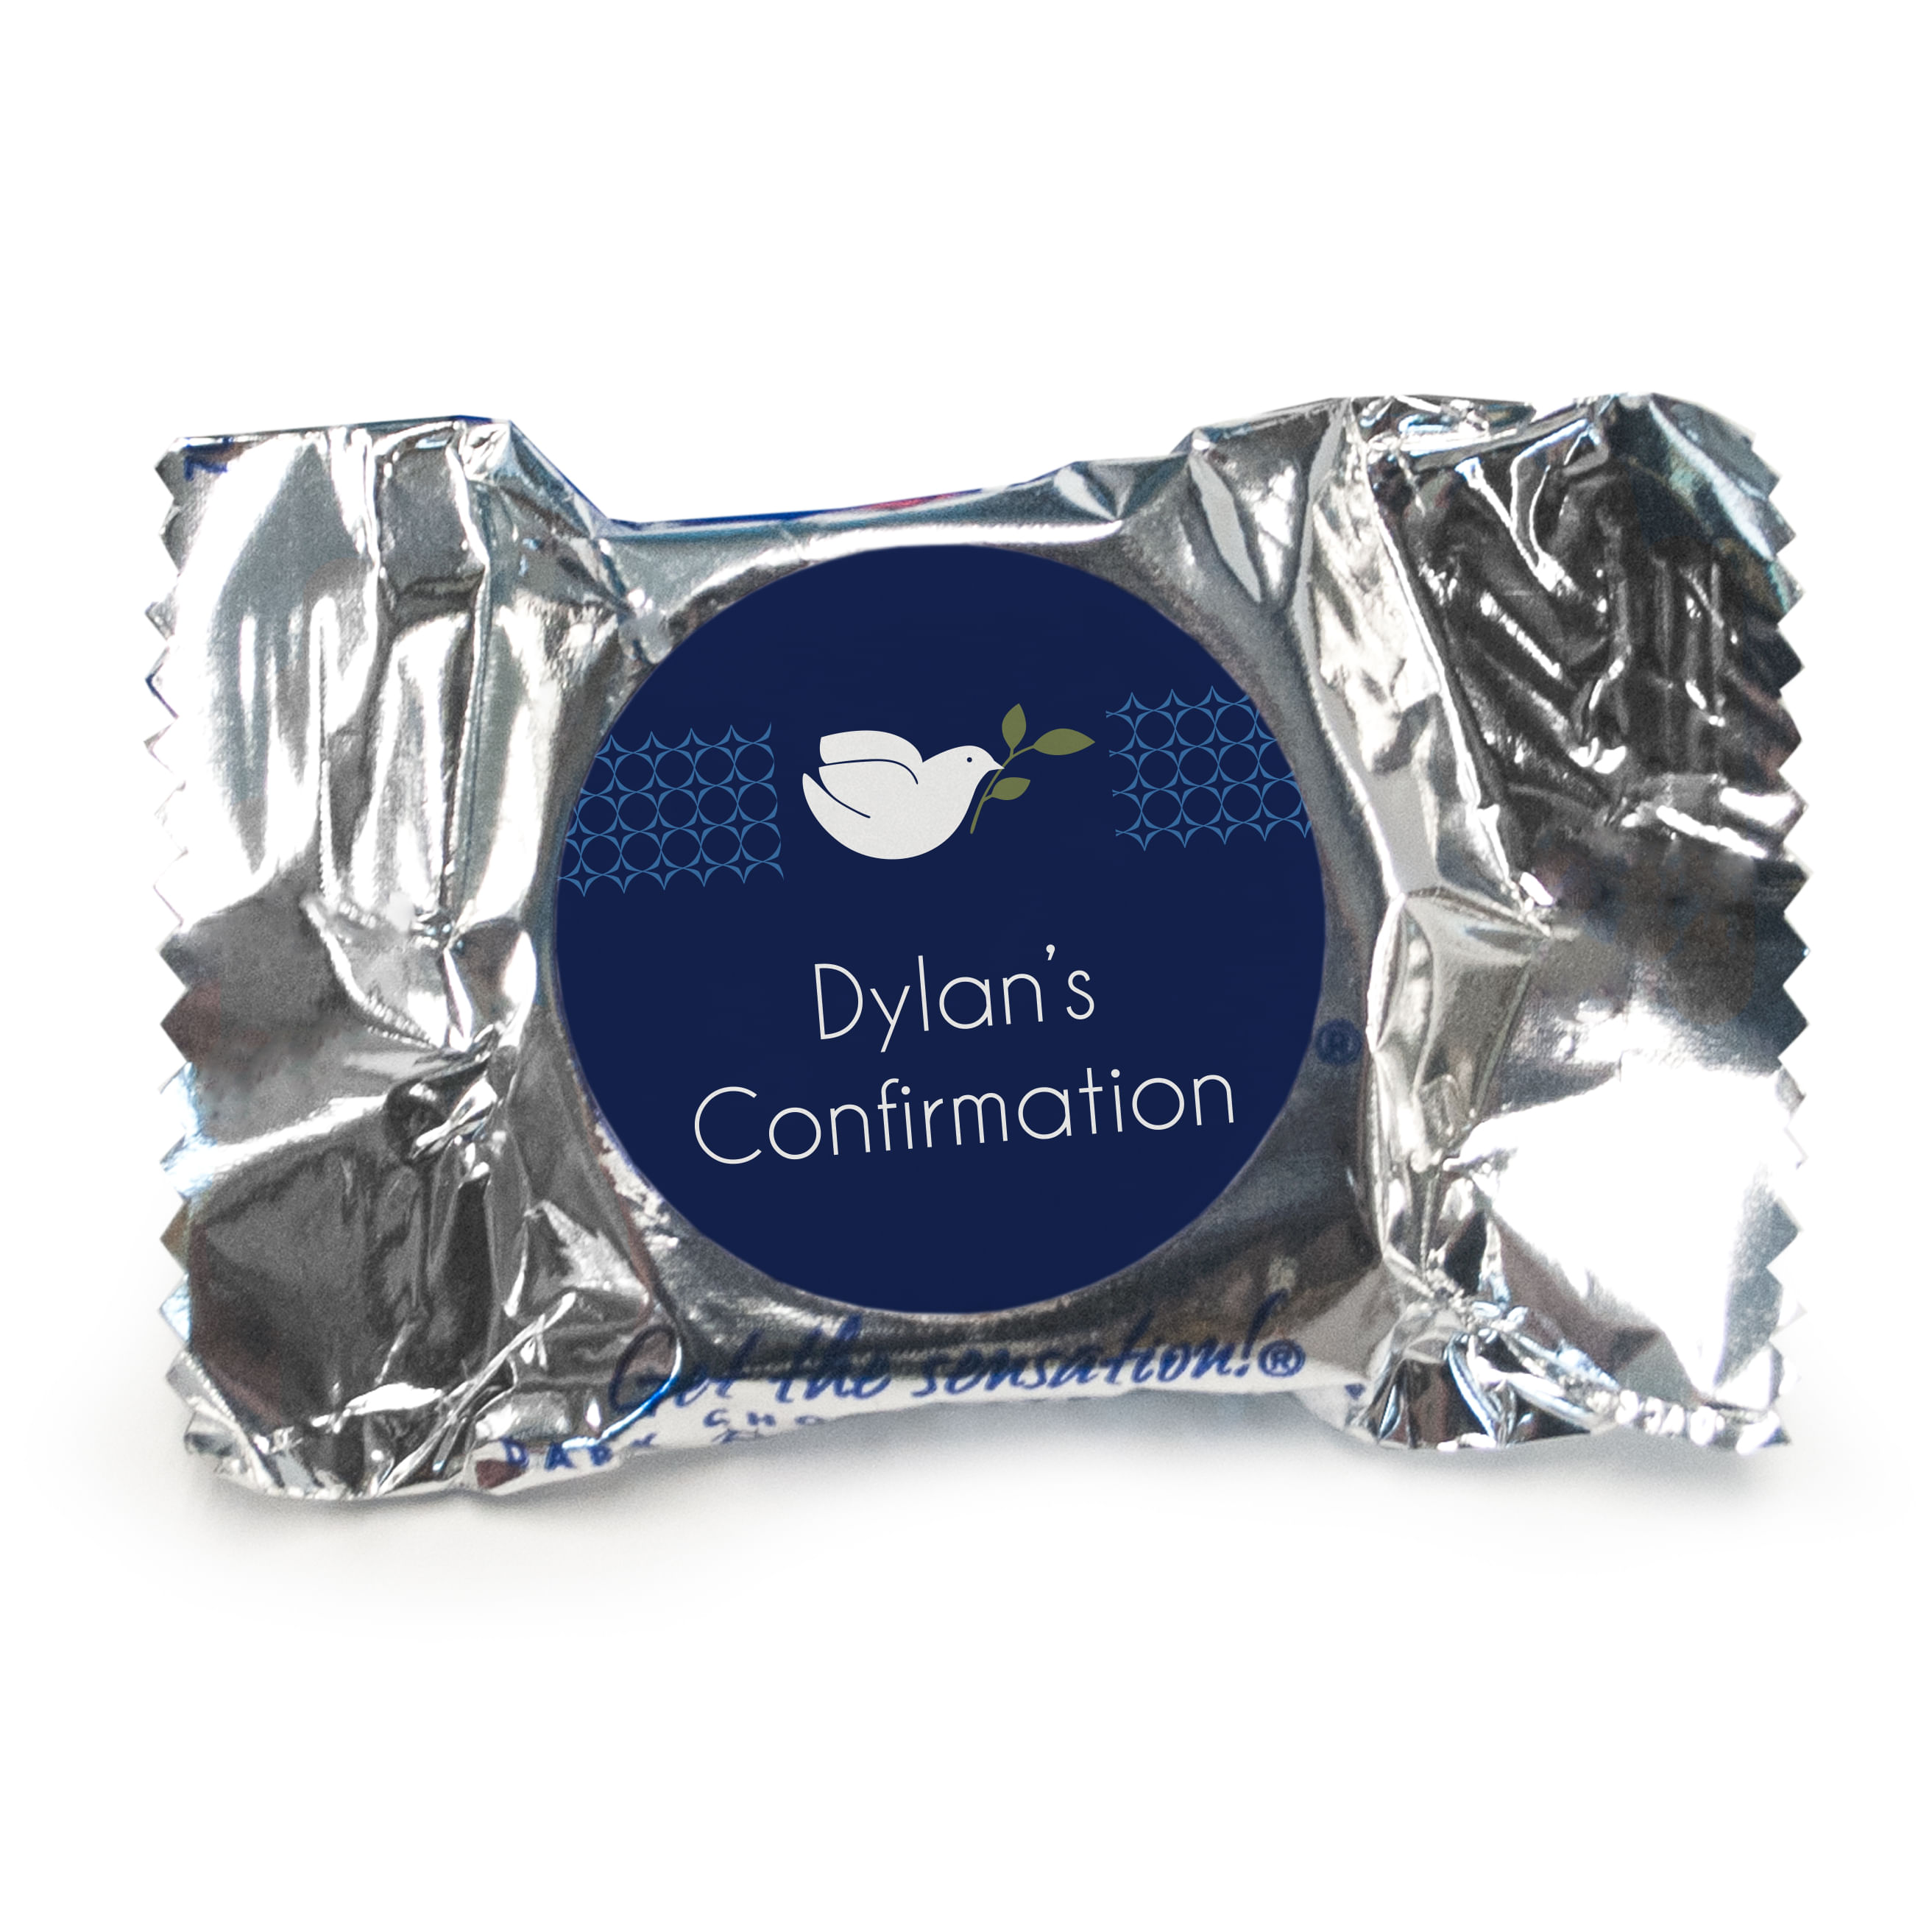 Confirmation Personalized York Peppermint Patties Peace Dove Navy Blue ...